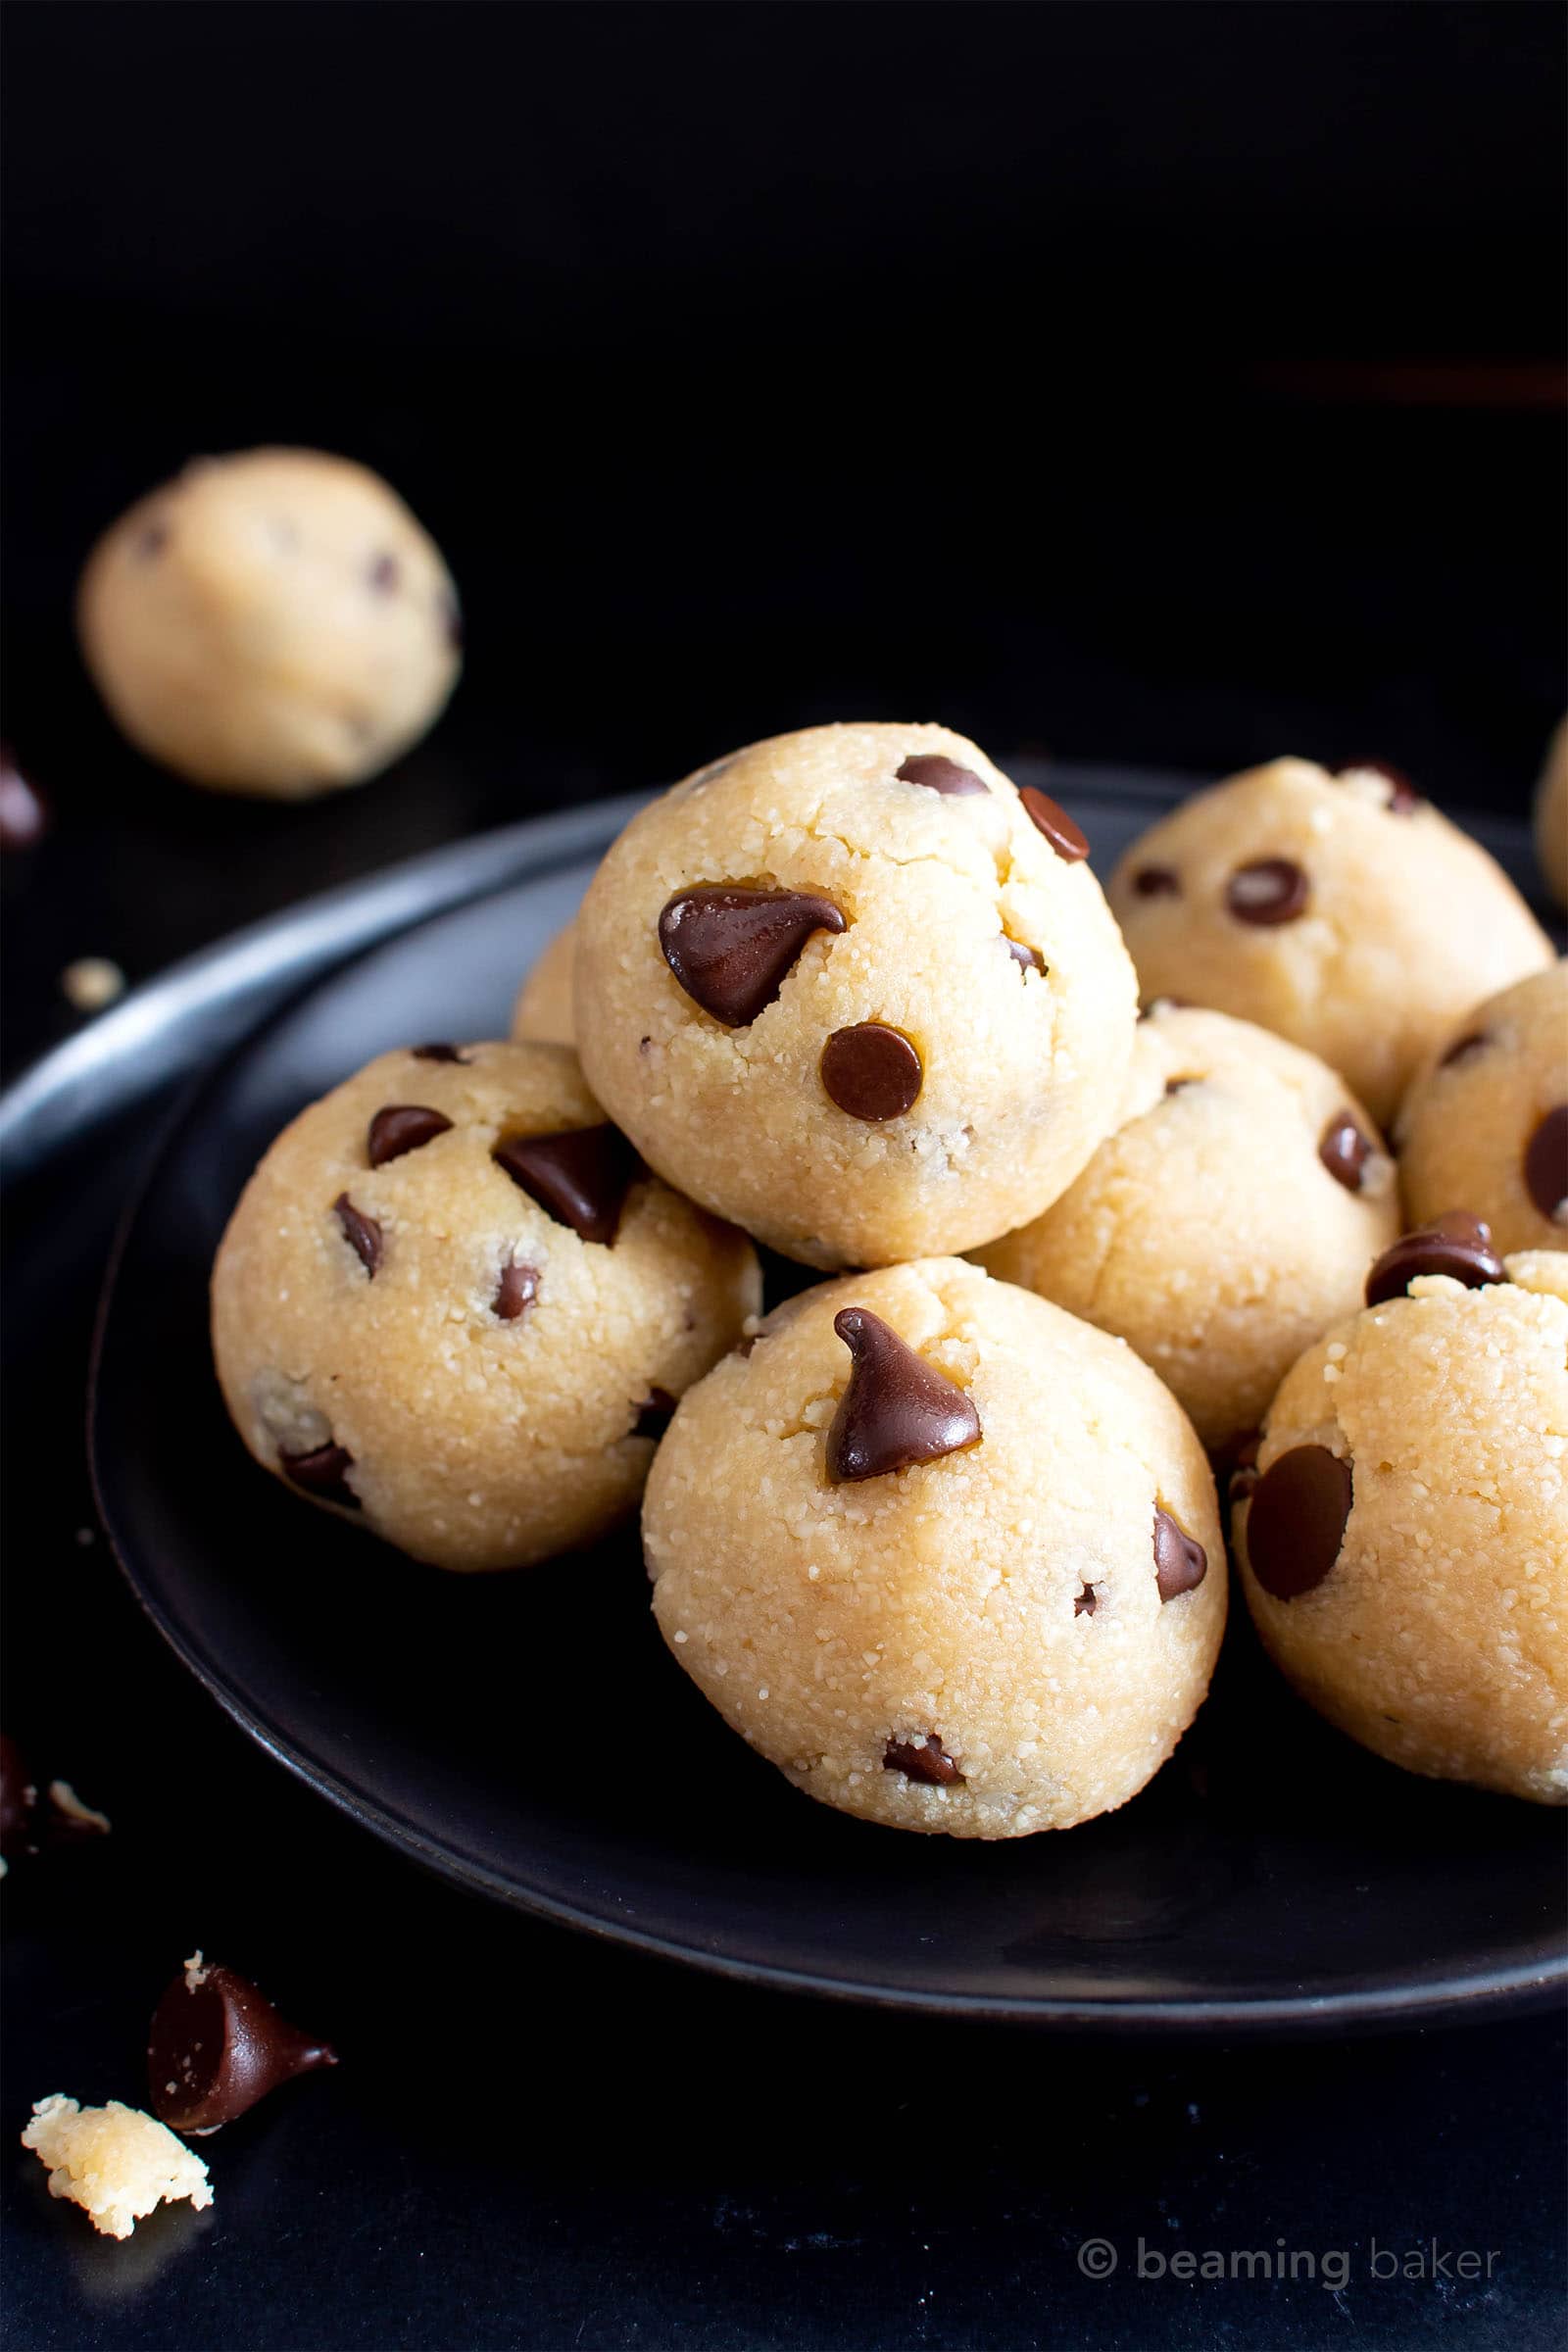 Paleo Cookie Dough Bites (V, GF): this decadent paleo edible cookie dough balls recipe is made with almond flour, just 6 healthy ingredients, easy & gluten-free! It’s the best vegan chocolate chip cookie dough bites recipe ever! #CookieDough #Paleo #Vegan #Chocolate | Recipe at BeamingBaker.com